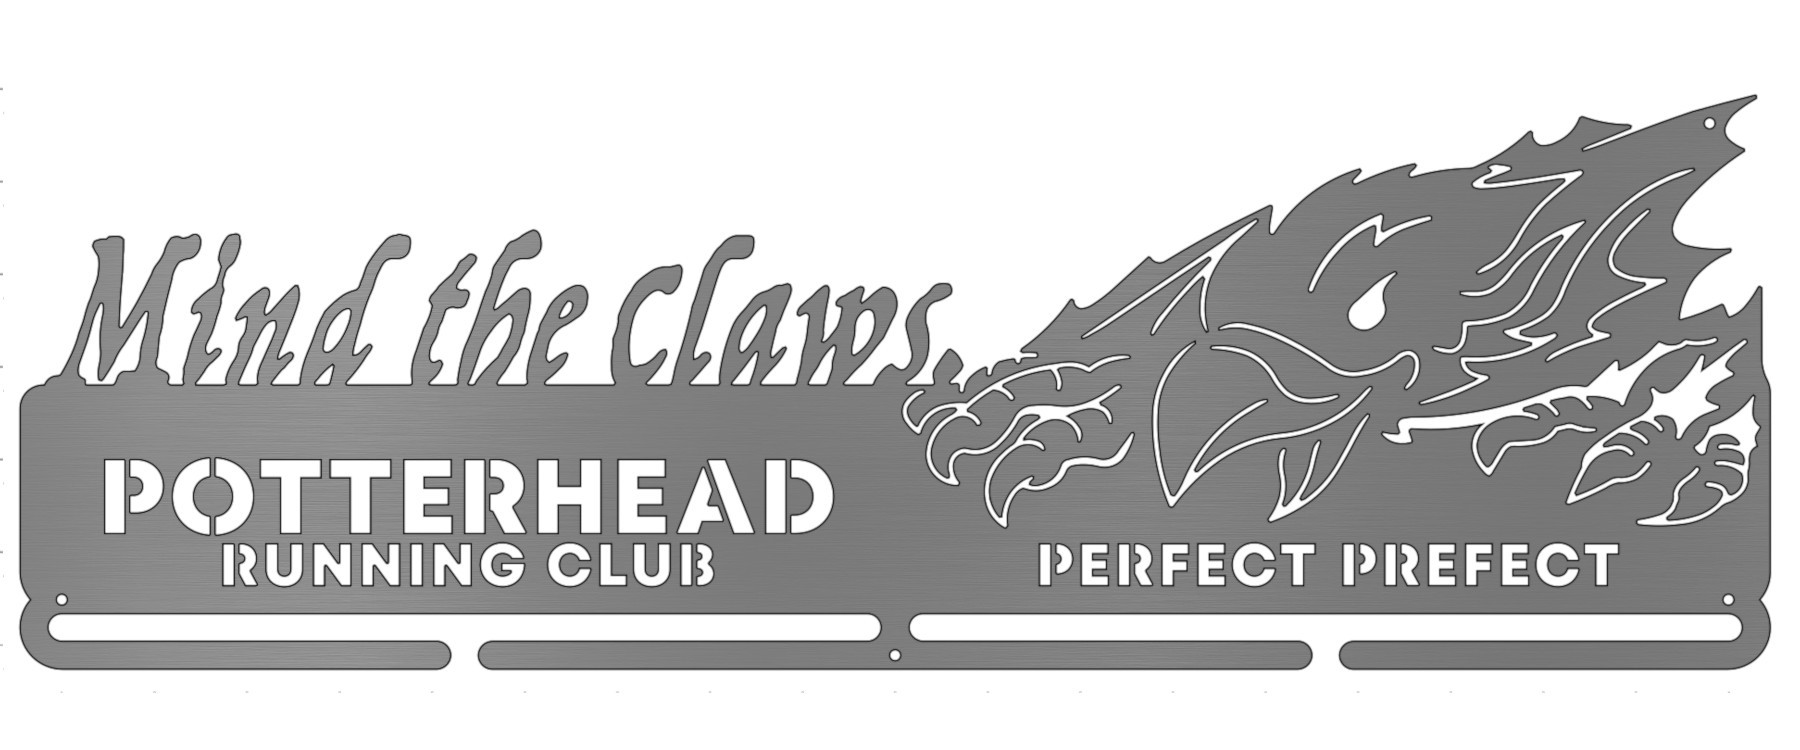 Potterhead Running Club - Mind the Claws - Perfect Prefect